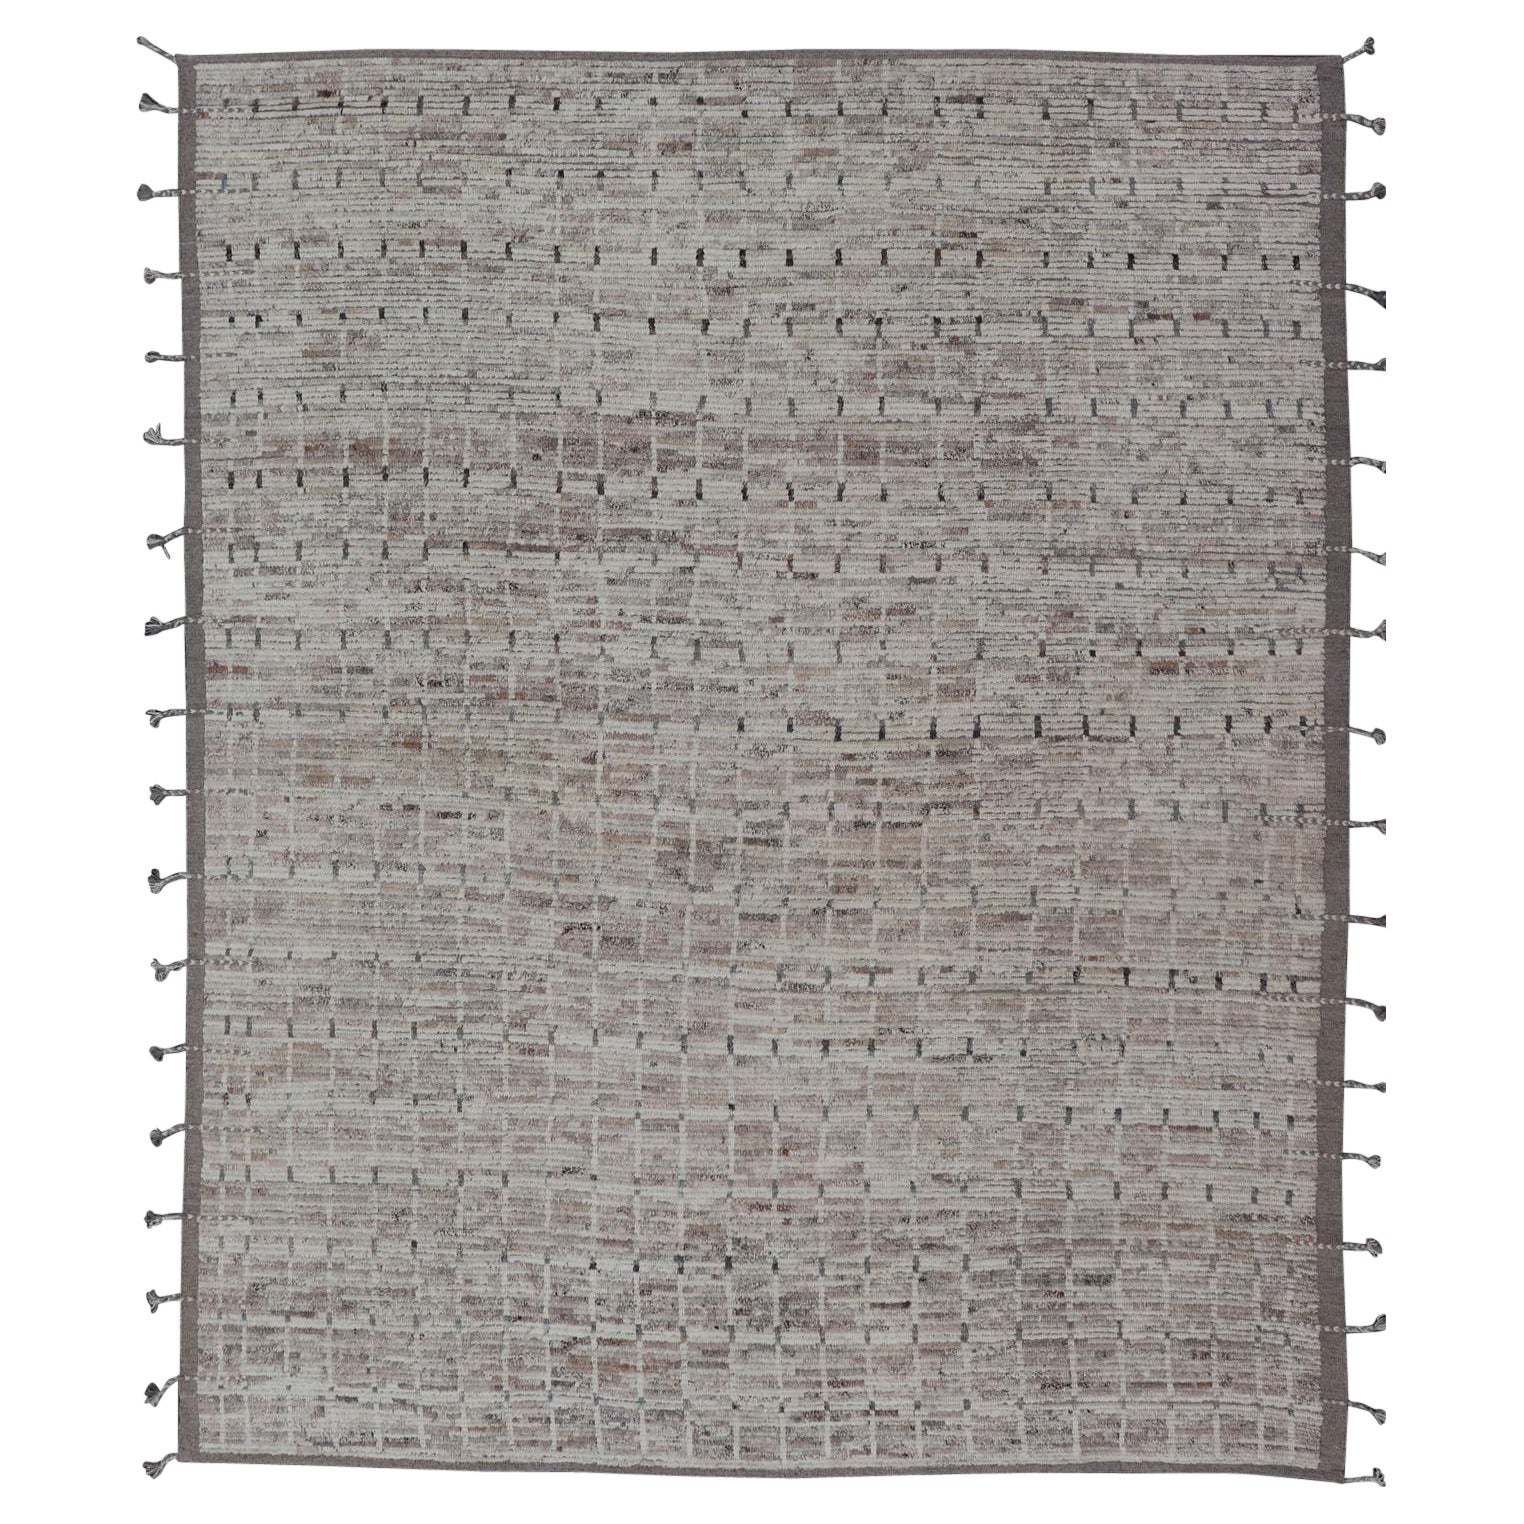 Modern Afghanistan Rug with All-Over Design in Muted Tones of Cream, Gray, Taupe